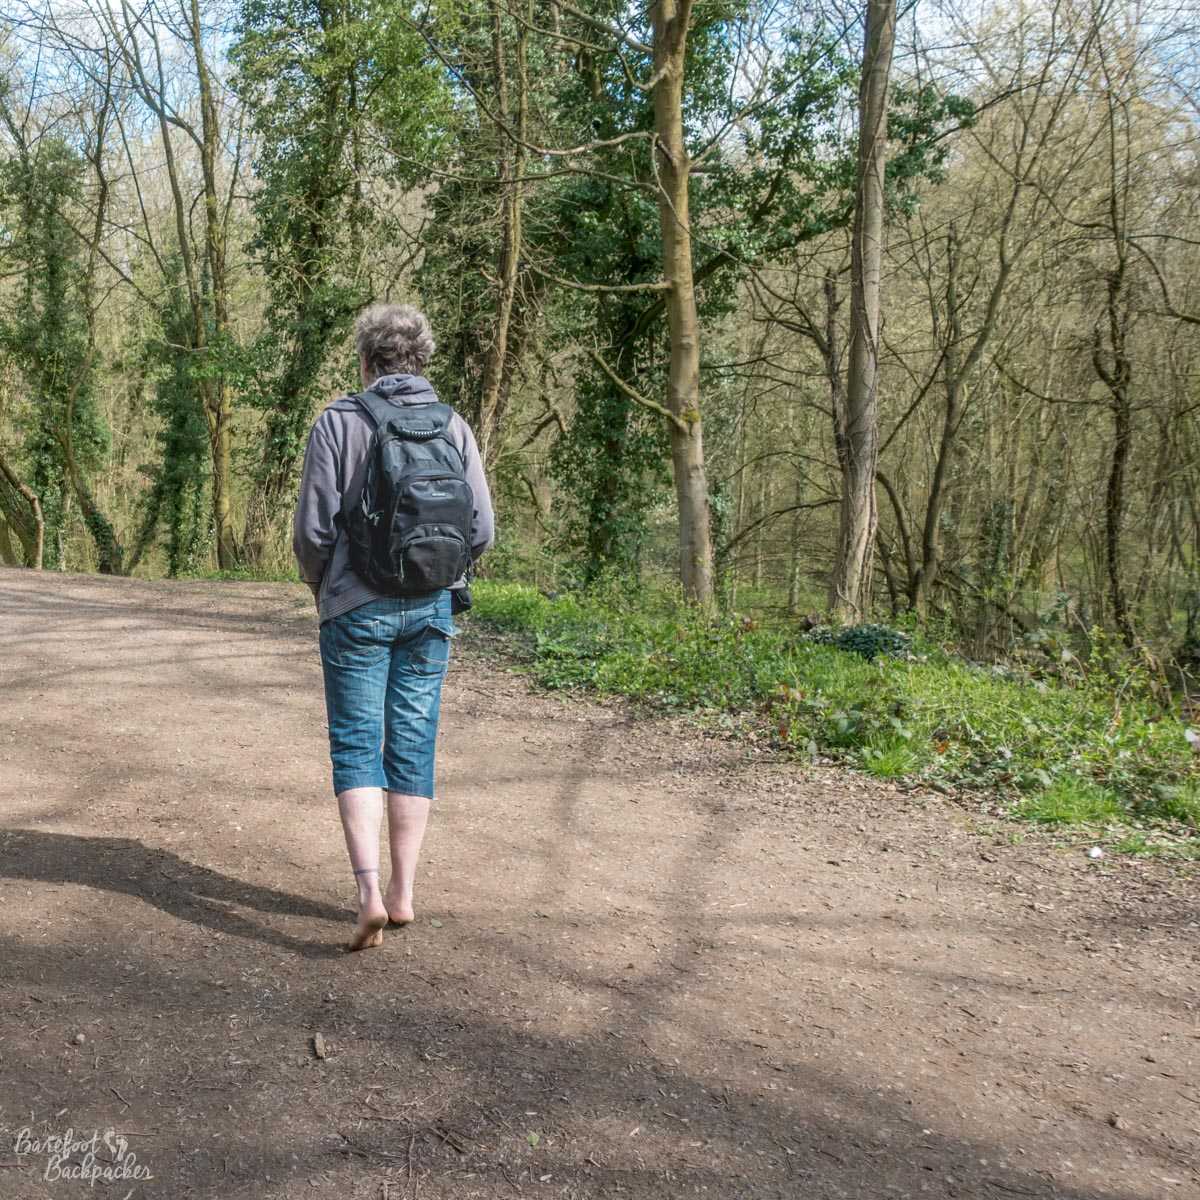 An image of me, walking out of shot in Portland Park - the woods in my hometown.